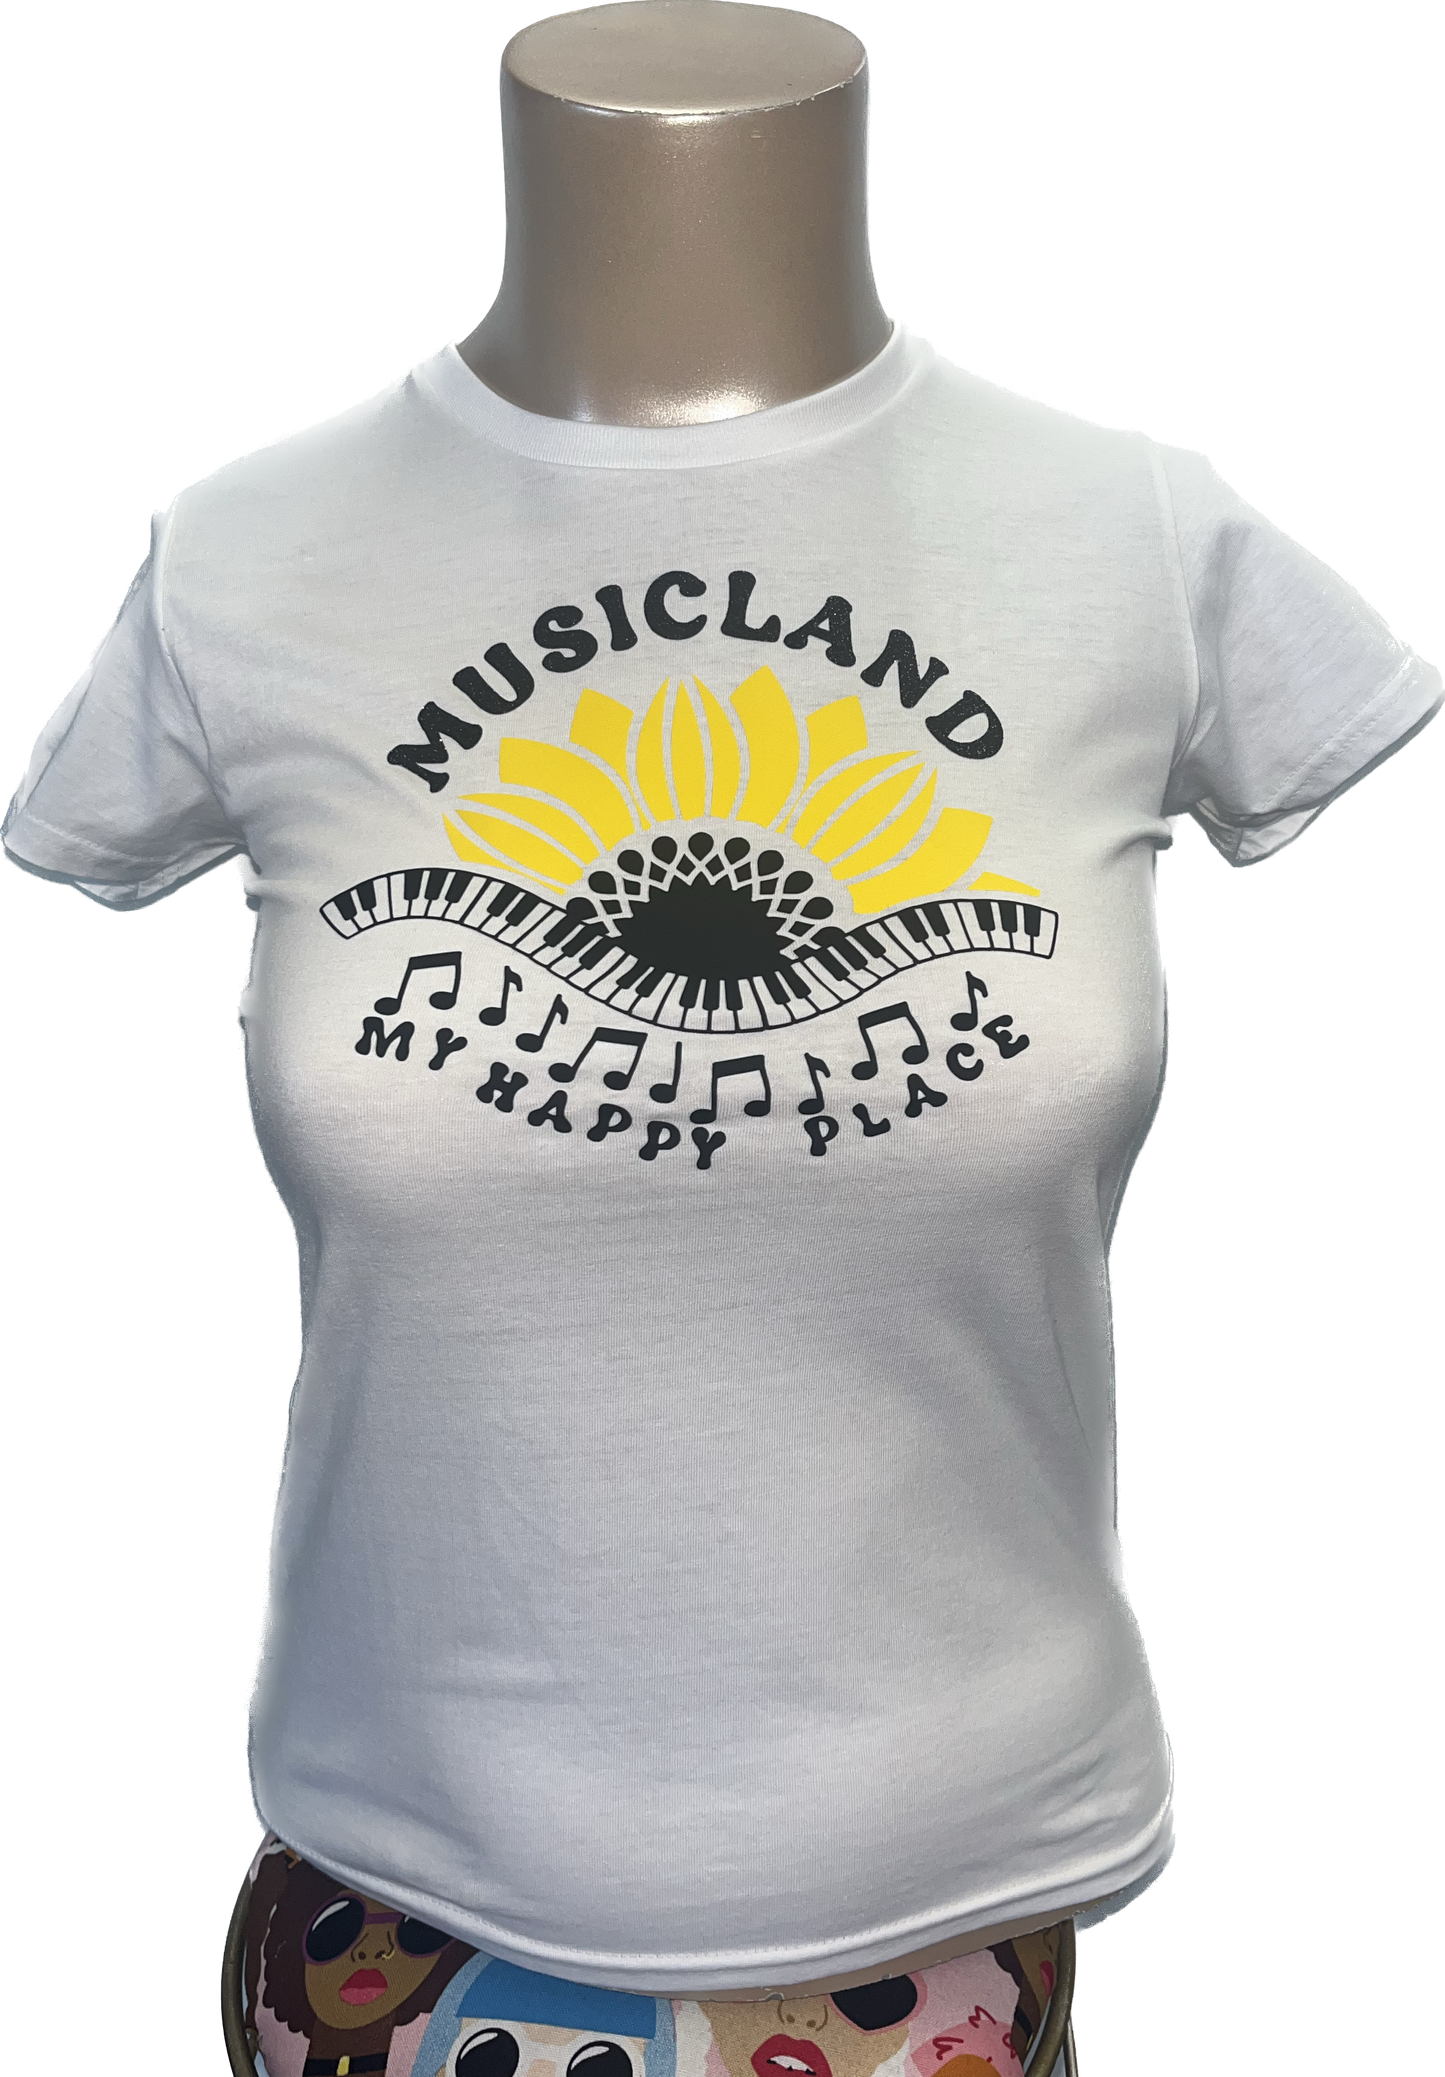 Musicland - My Happy Place T Shirt